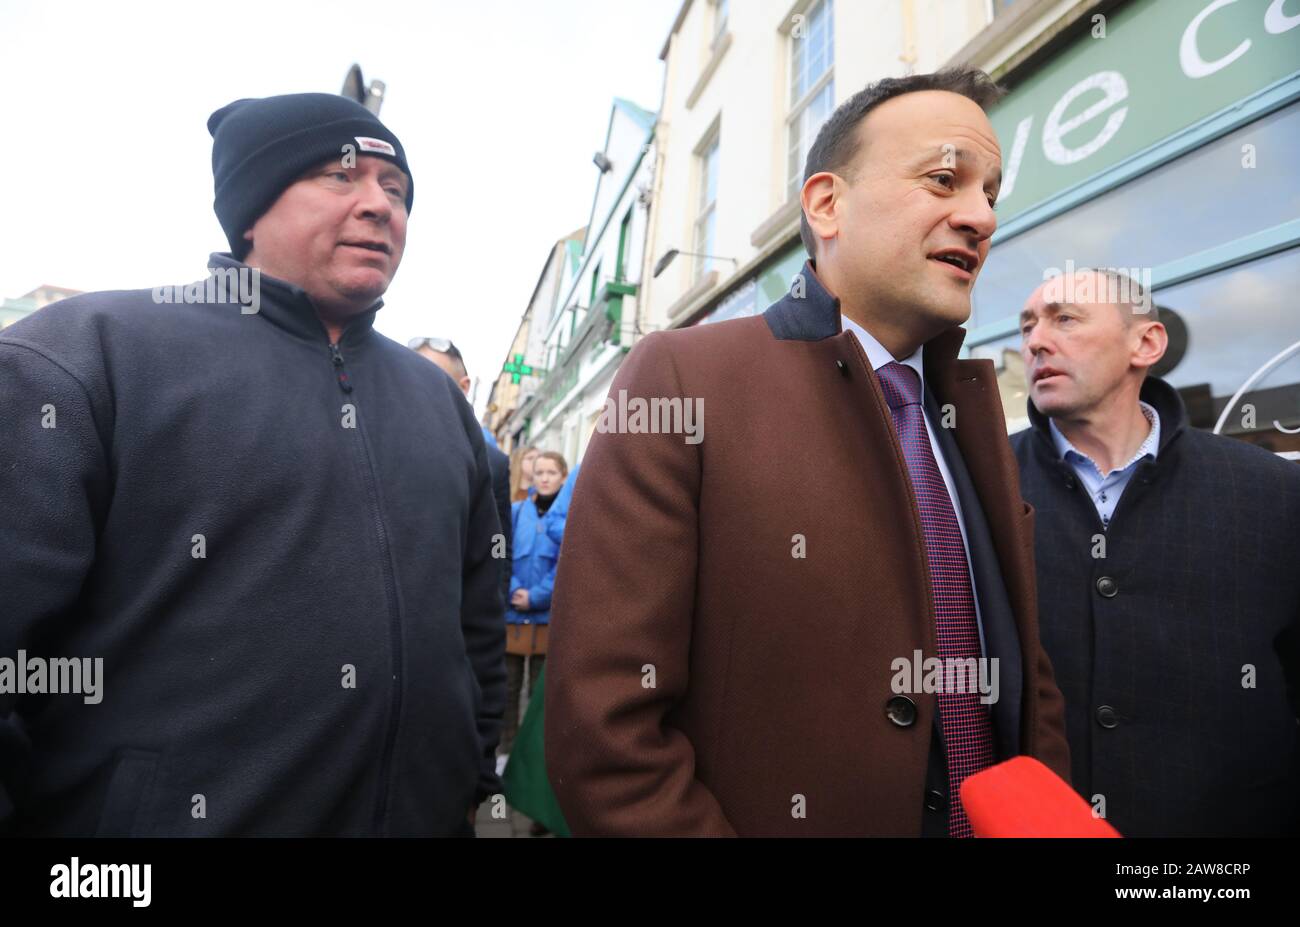 Tullow, Carlow, Ireland. 6/February/2020. General Election 2020. A man (left) confronts Taoiseach and Fine Gael leader Leo Varadkar, over the CervicalCheck scandal during a canvass of Tulow in County Carlow. Local FG candidate Pat Deery is on the right. Photo: Eamonn Farrell/RollingNews.ie/Alamy Live News. Stock Photo